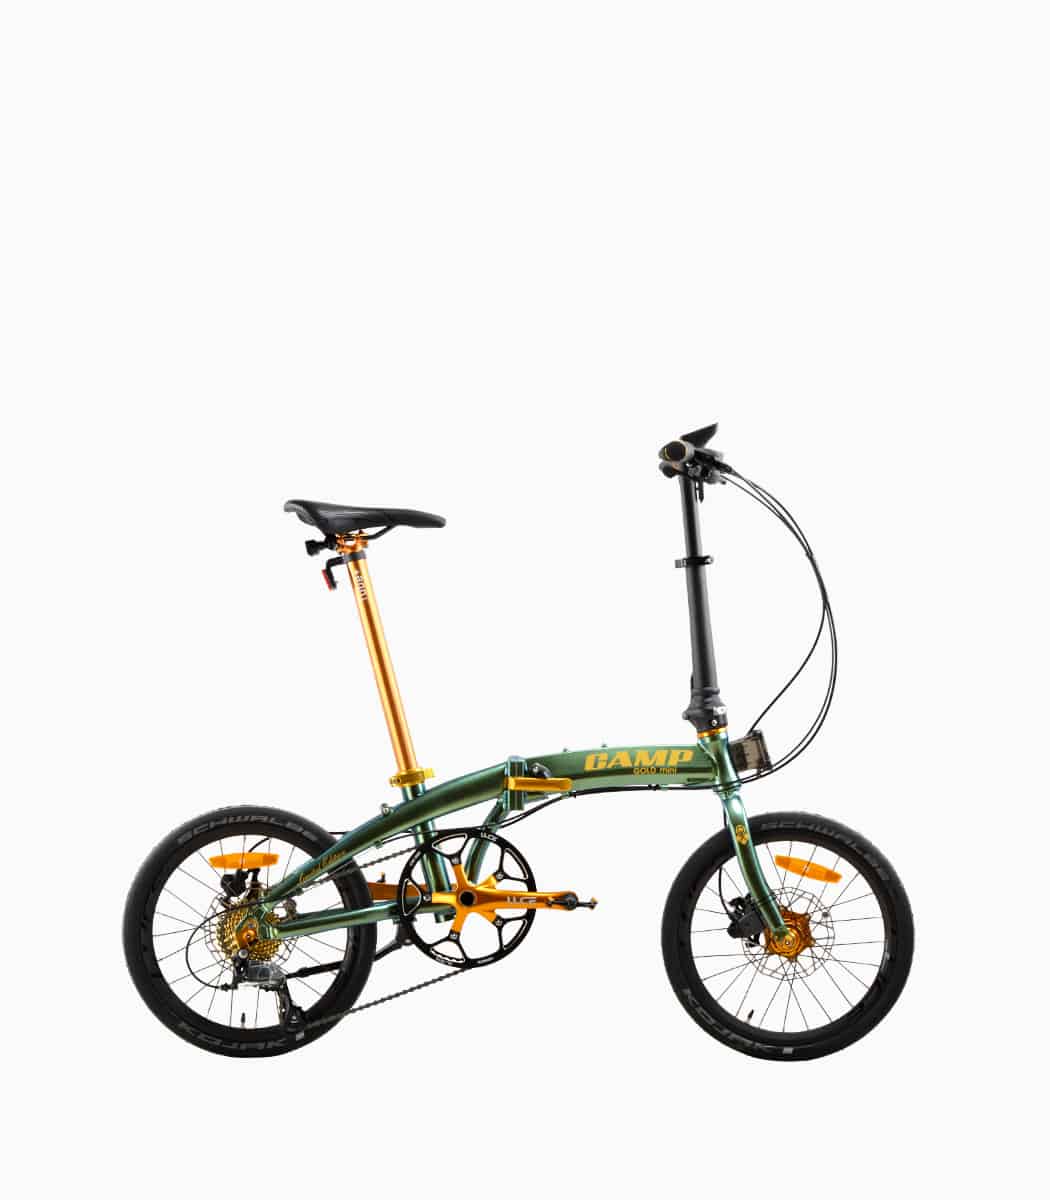 CAMP Gold Mini Sport (AURORA) foldable bicycle right